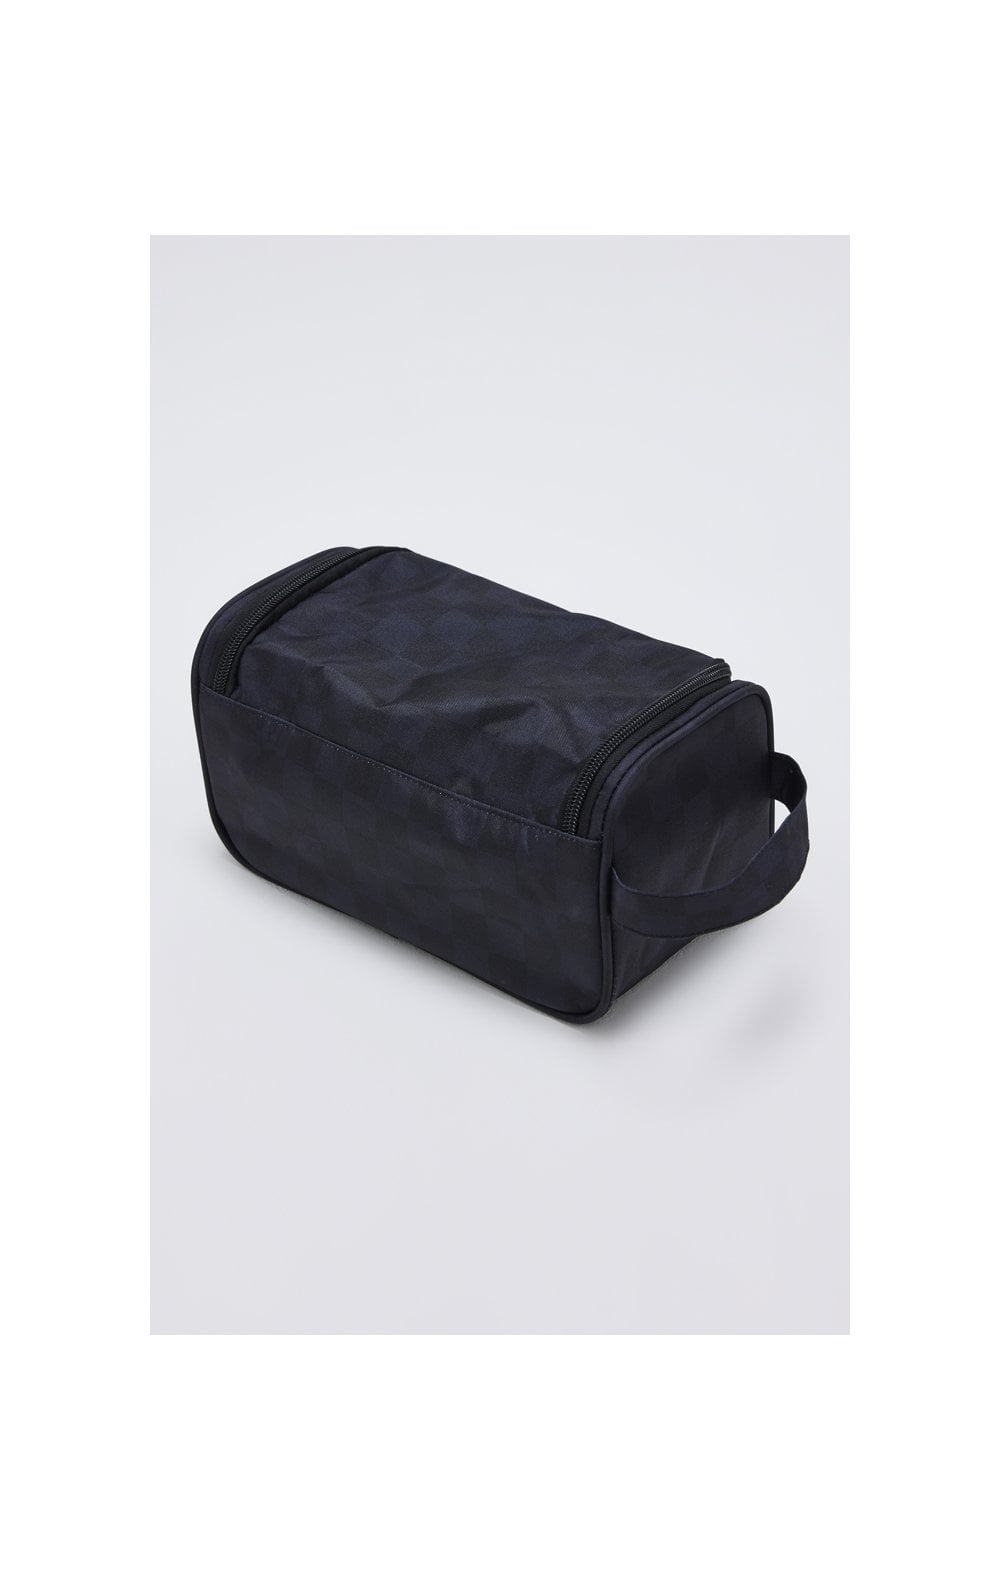 Load image into Gallery viewer, SikSilk Elite Checkered Wash Bag - Black (2)